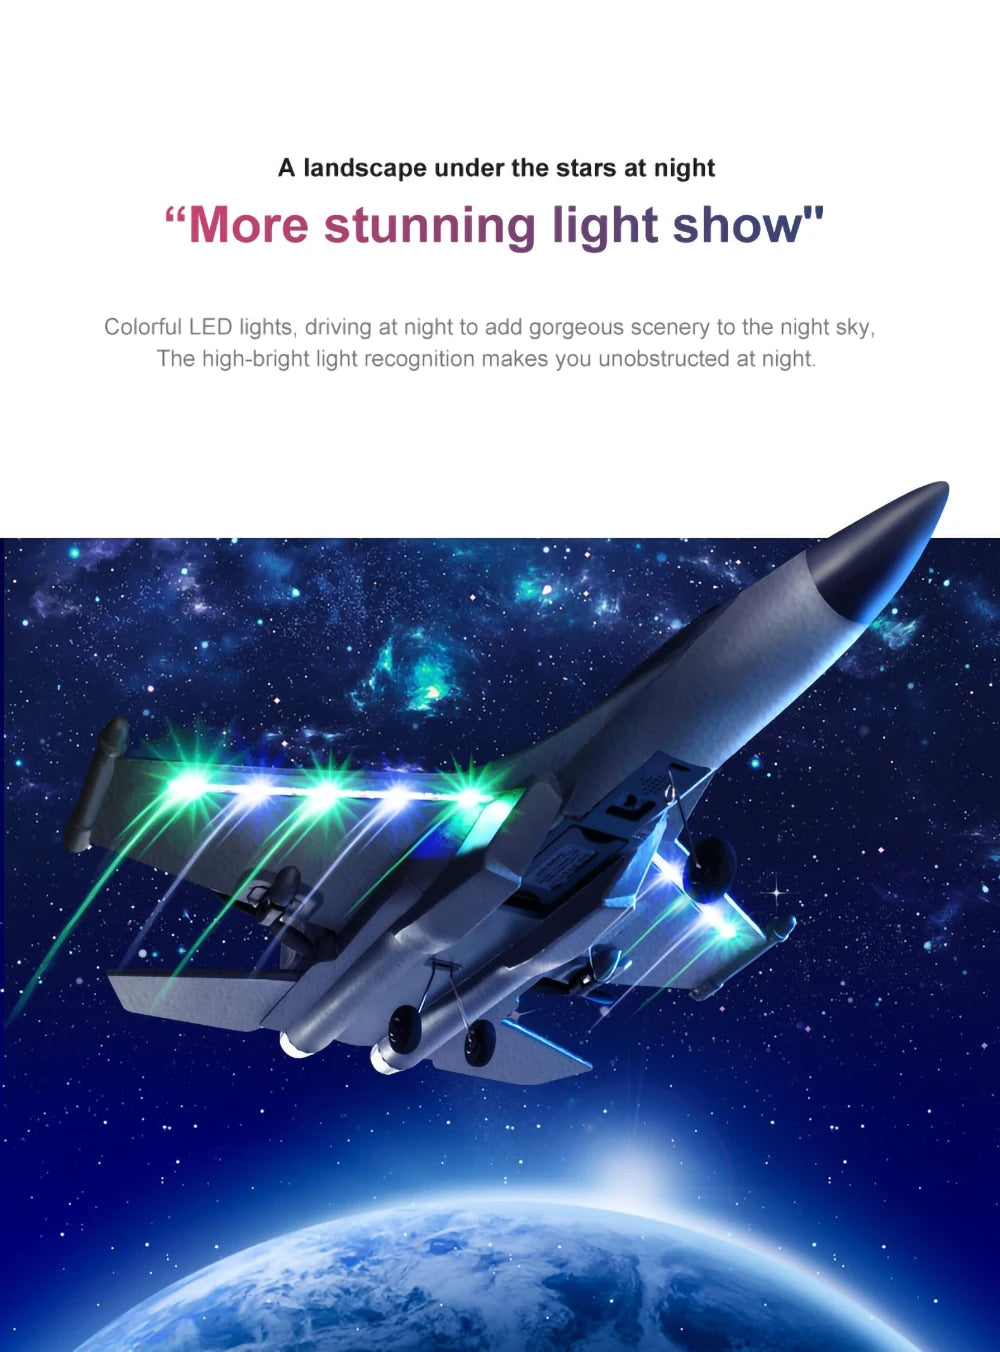 RC283 RC Airplane, high-bright light recognition makes you unobstructed at night . "Mor